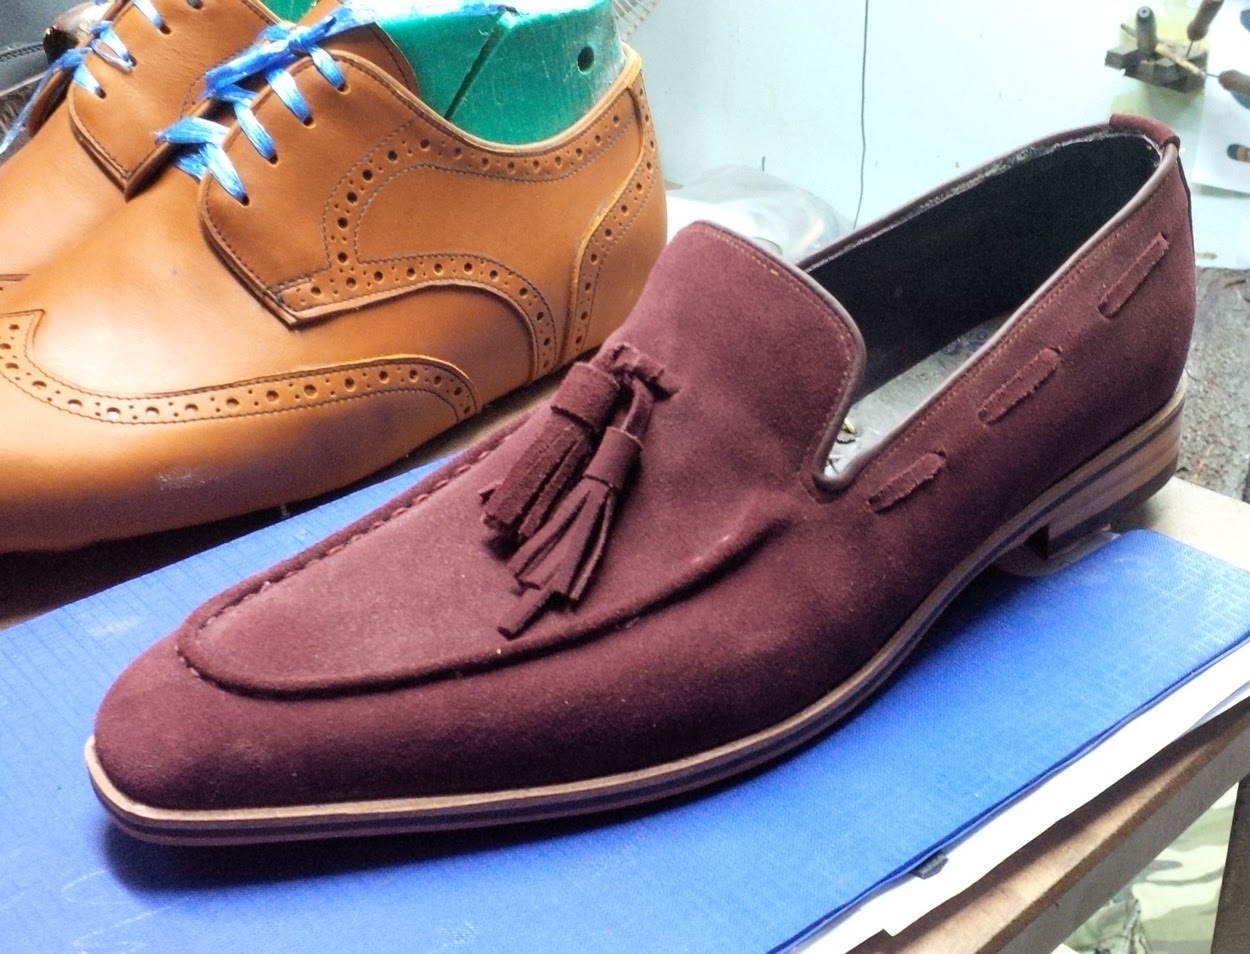 Production photos of elevator shoes and bespoke shoes - Don's Footwear